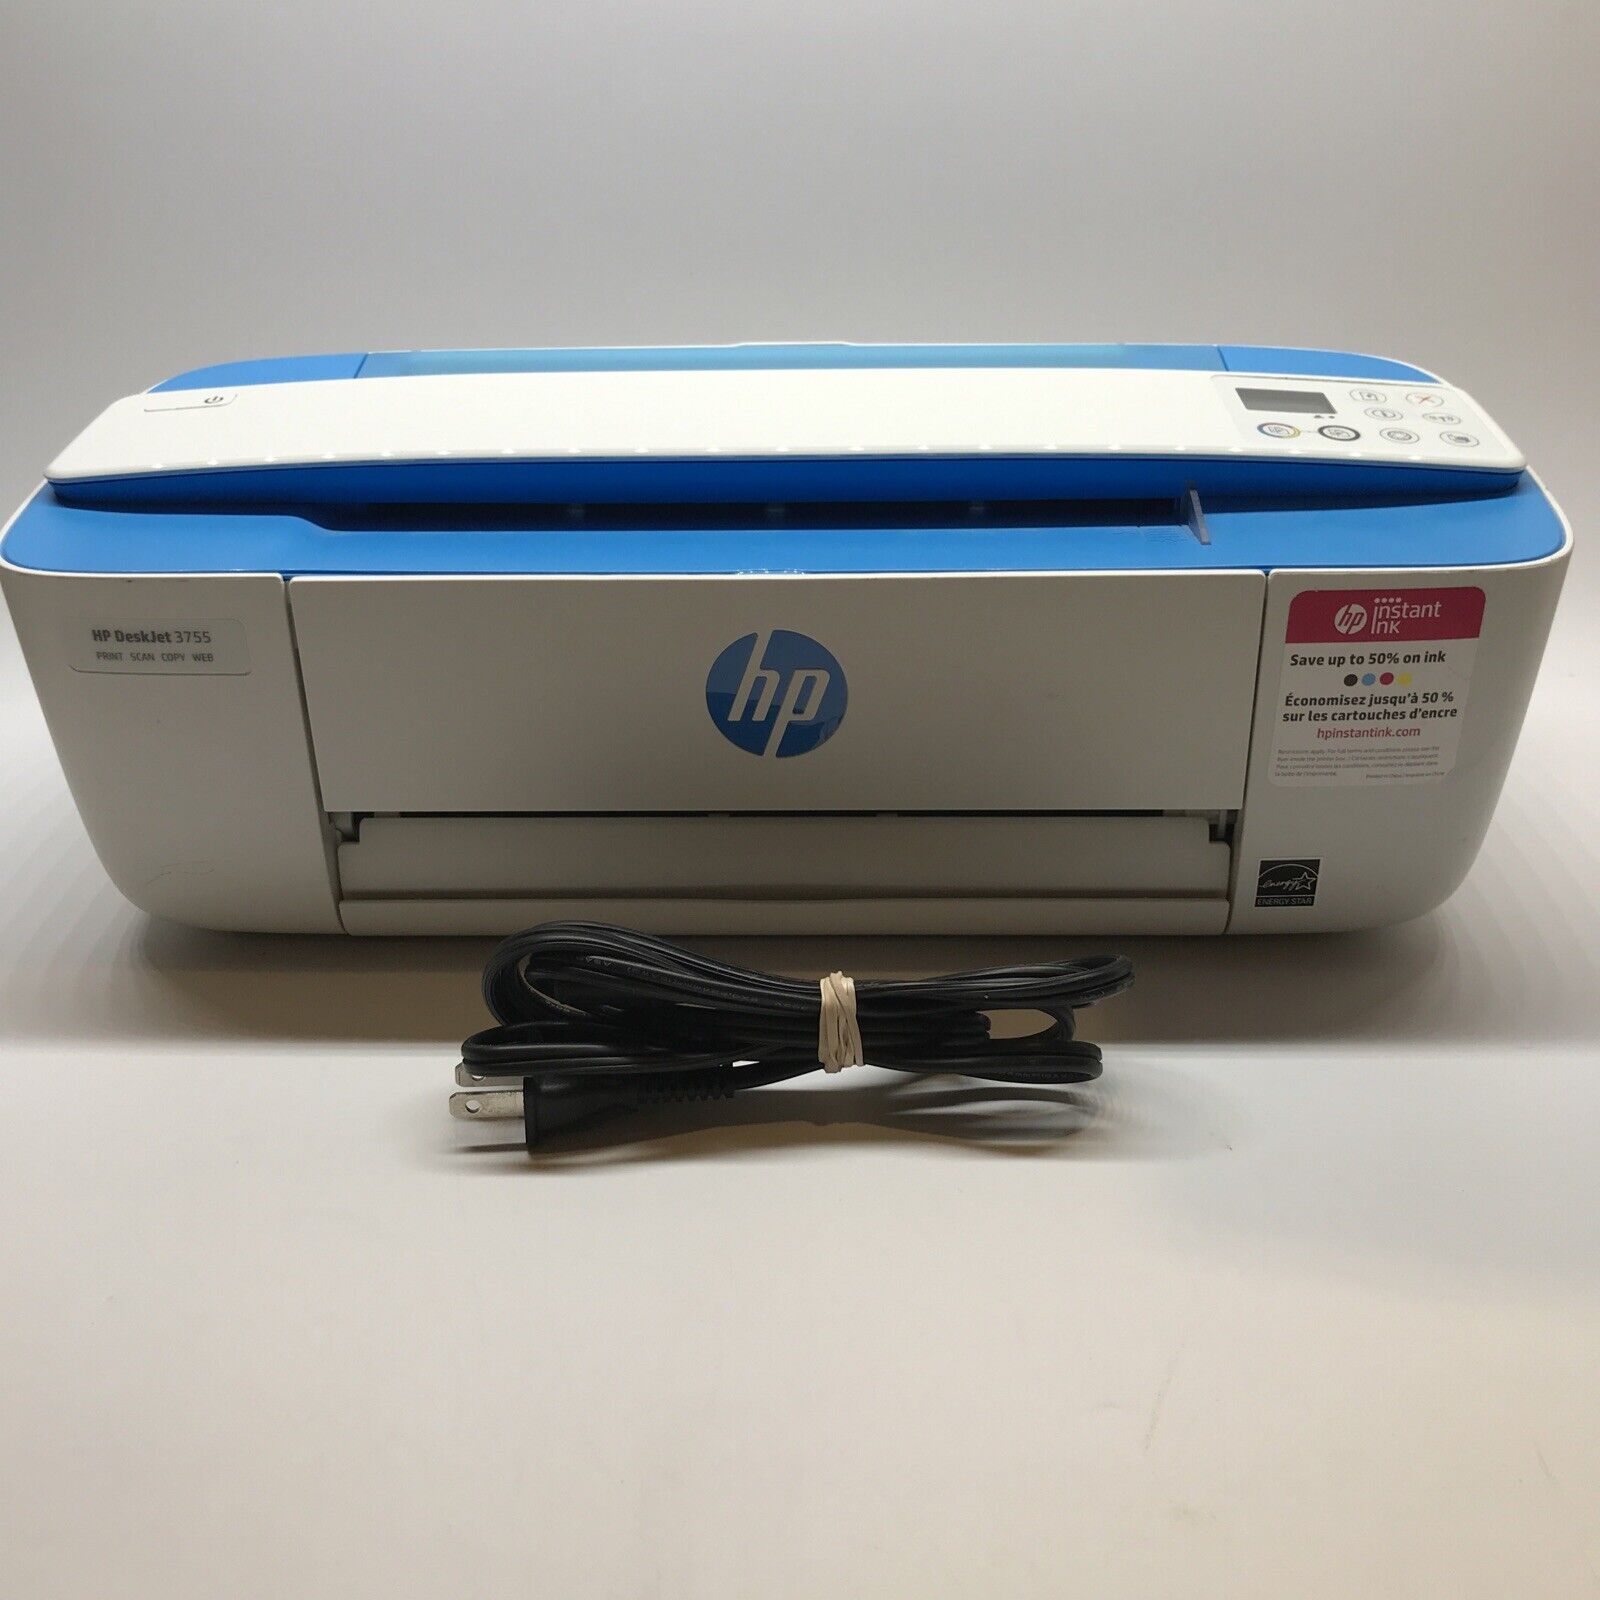 HP DeskJet 3755 Blue All-in-One Copy Printer Minor Sent At Stop Button Works